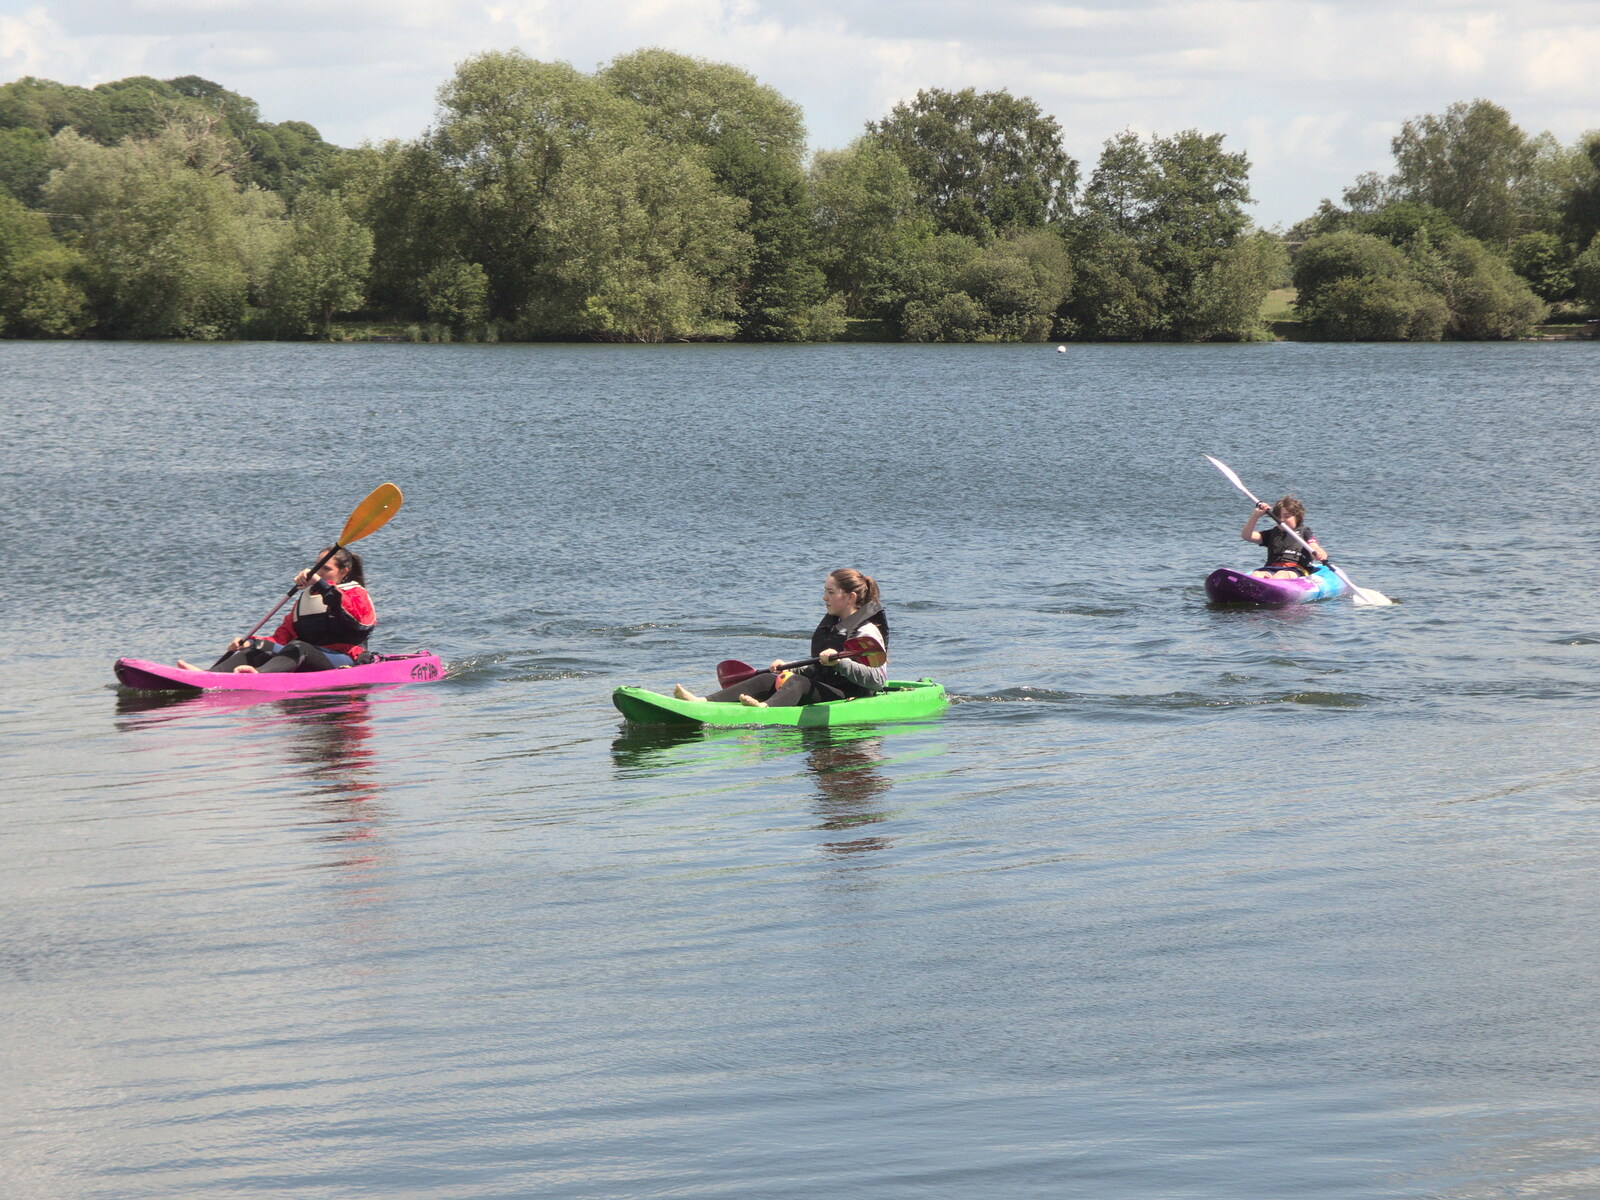 A Day at the Lake, Weybread Pits, Harleston, Norfolk - 11th June 2022: Emma and Amelia head the group